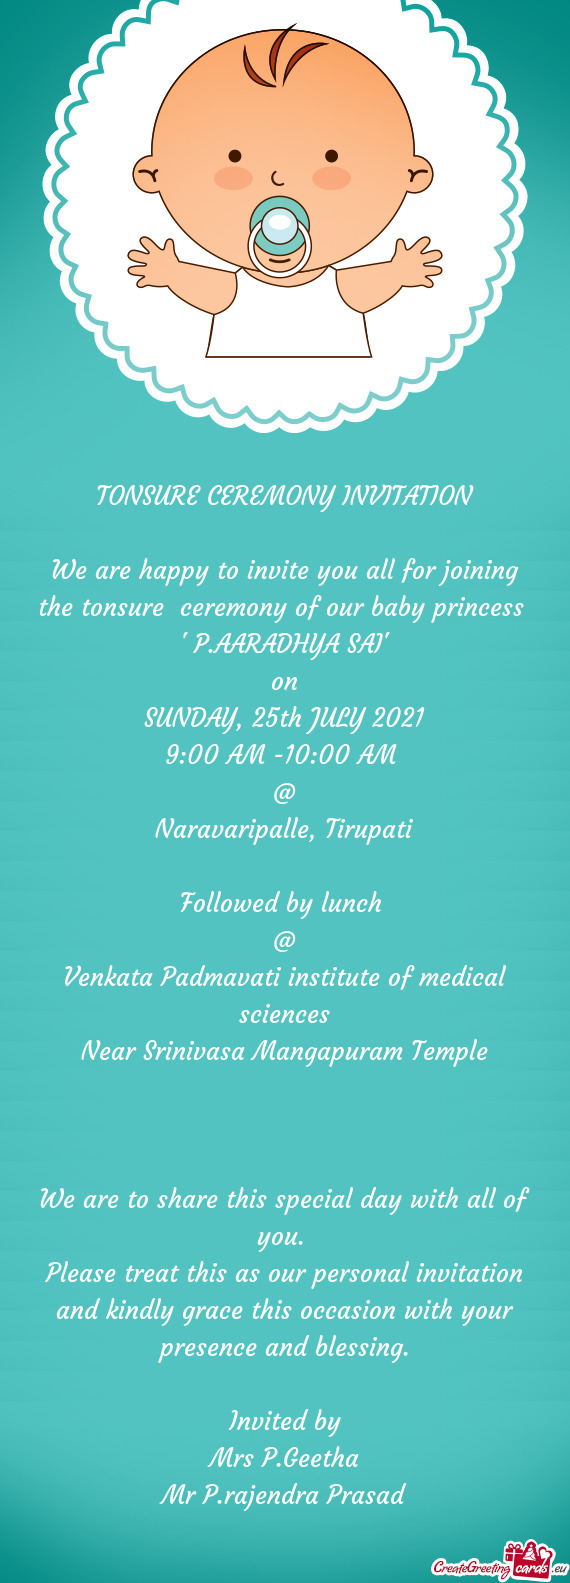 We are happy to invite you all for joining the tonsure ceremony of our baby princess